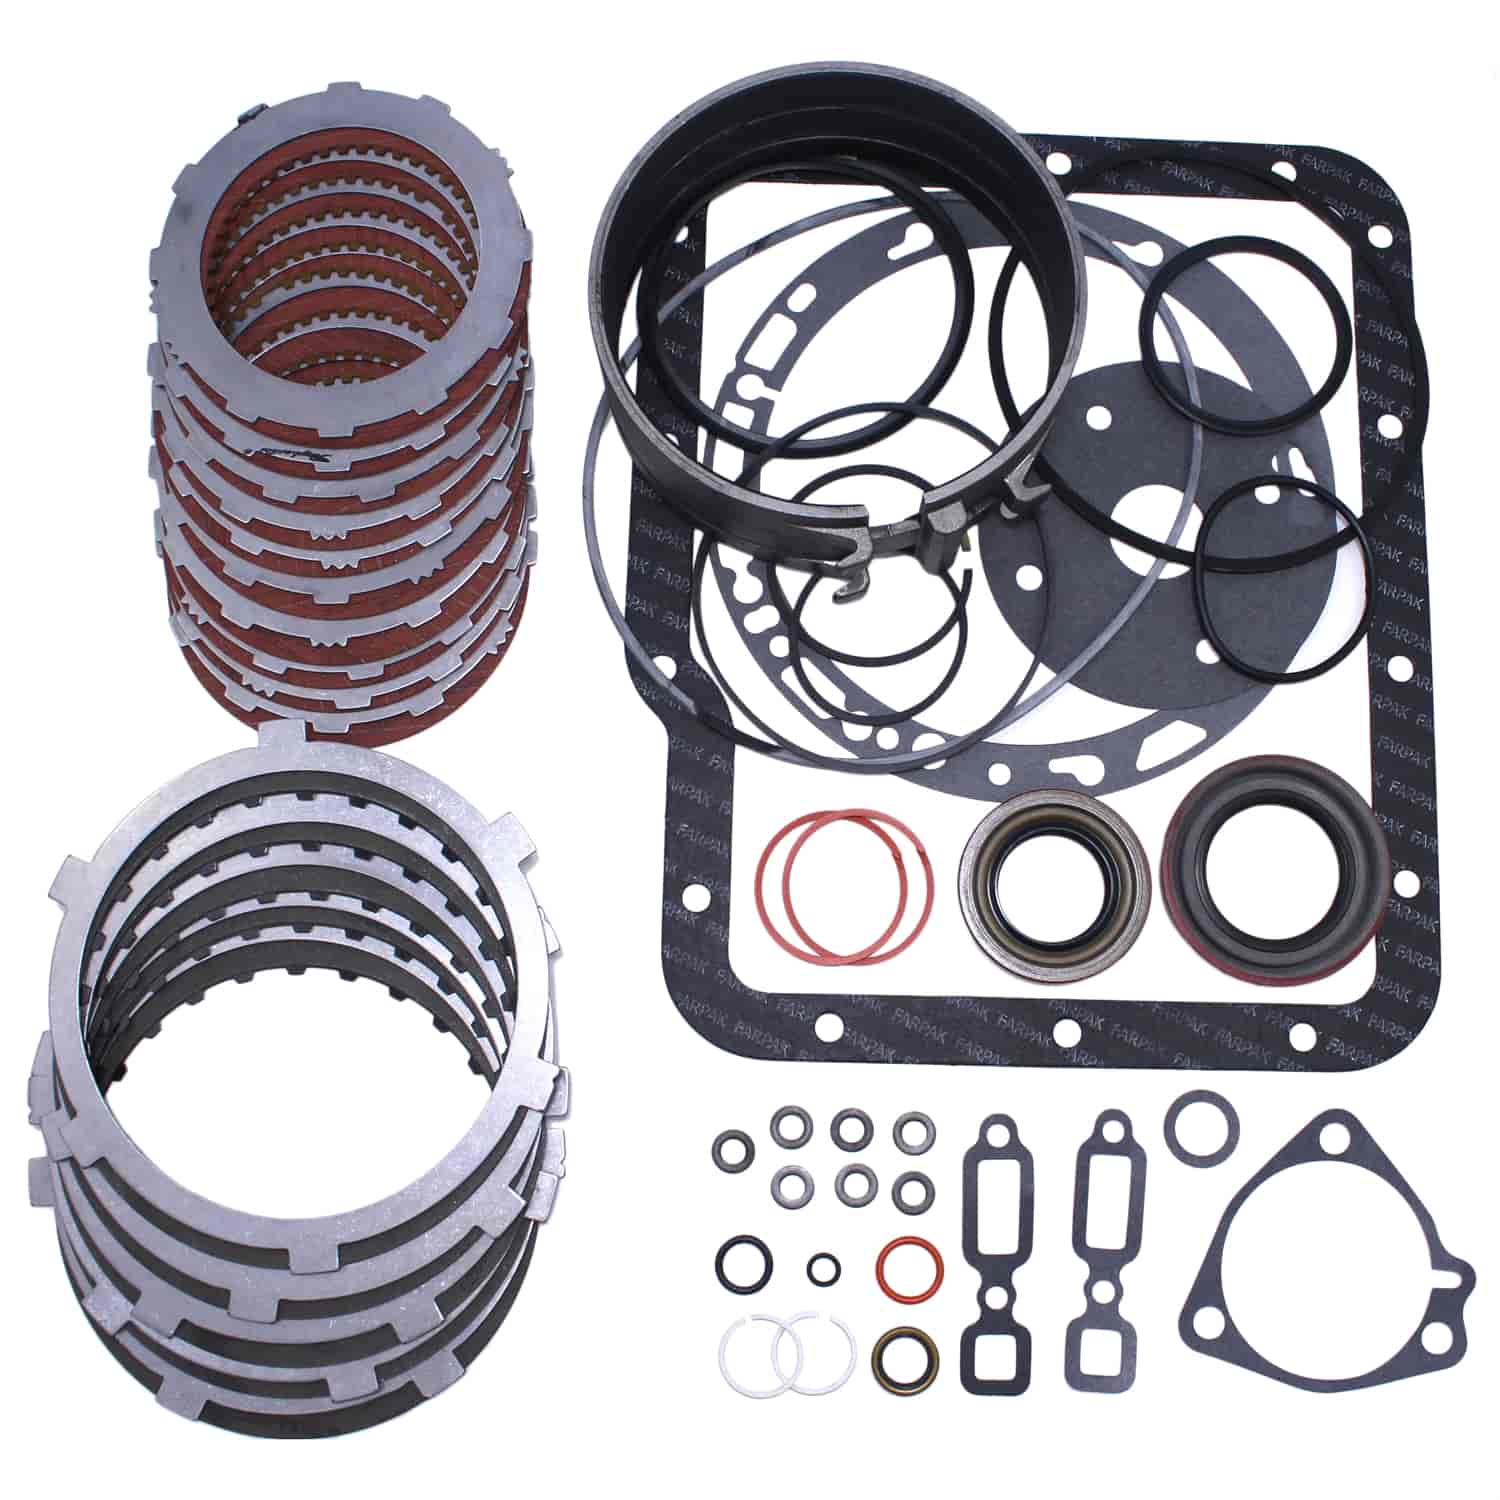 FTI PERFORMANCE GM POWER GLIDE 10 CLUTCH YOU BUILD IT PRO MOD KIT GASKET AND SEALS PTFE SEALING RI